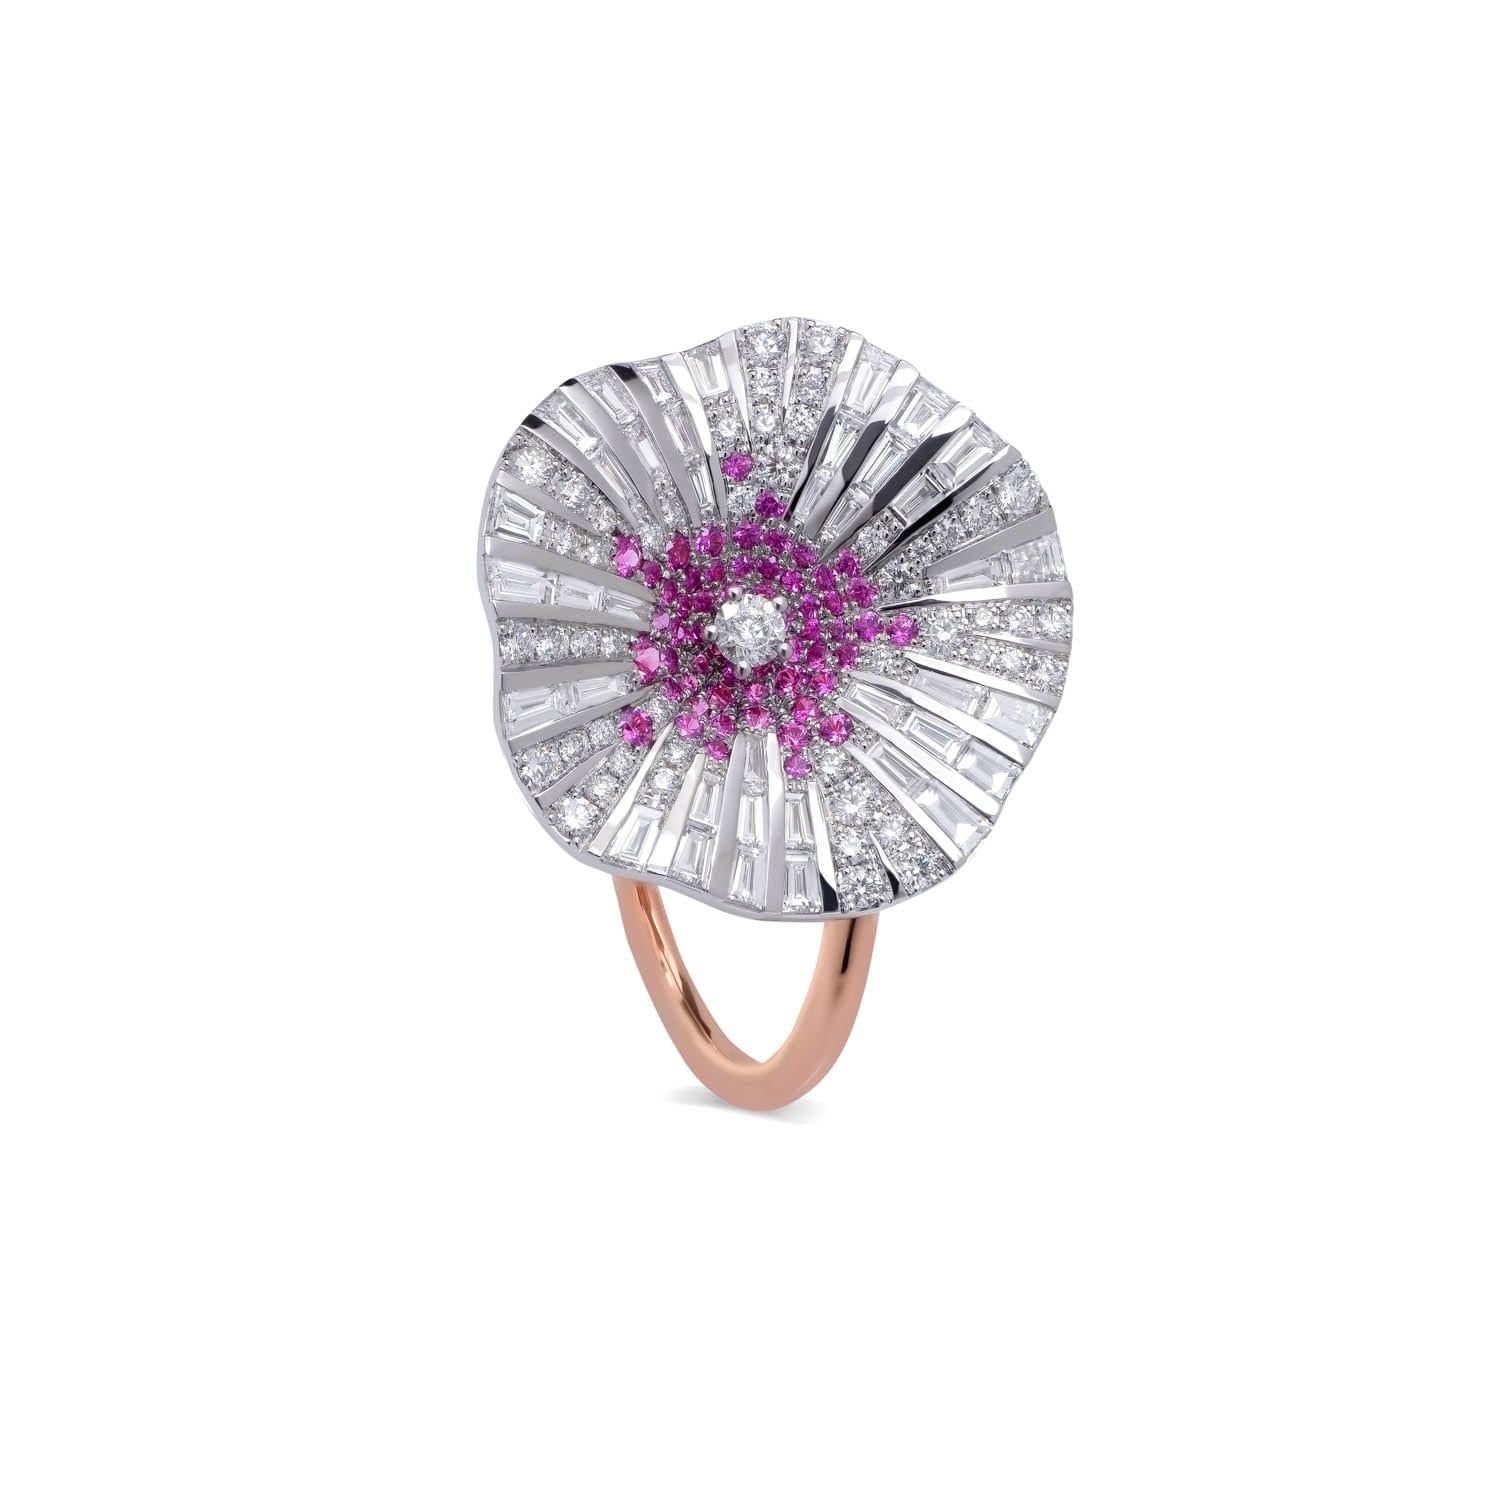 BELLE Pink Sapphire Ring